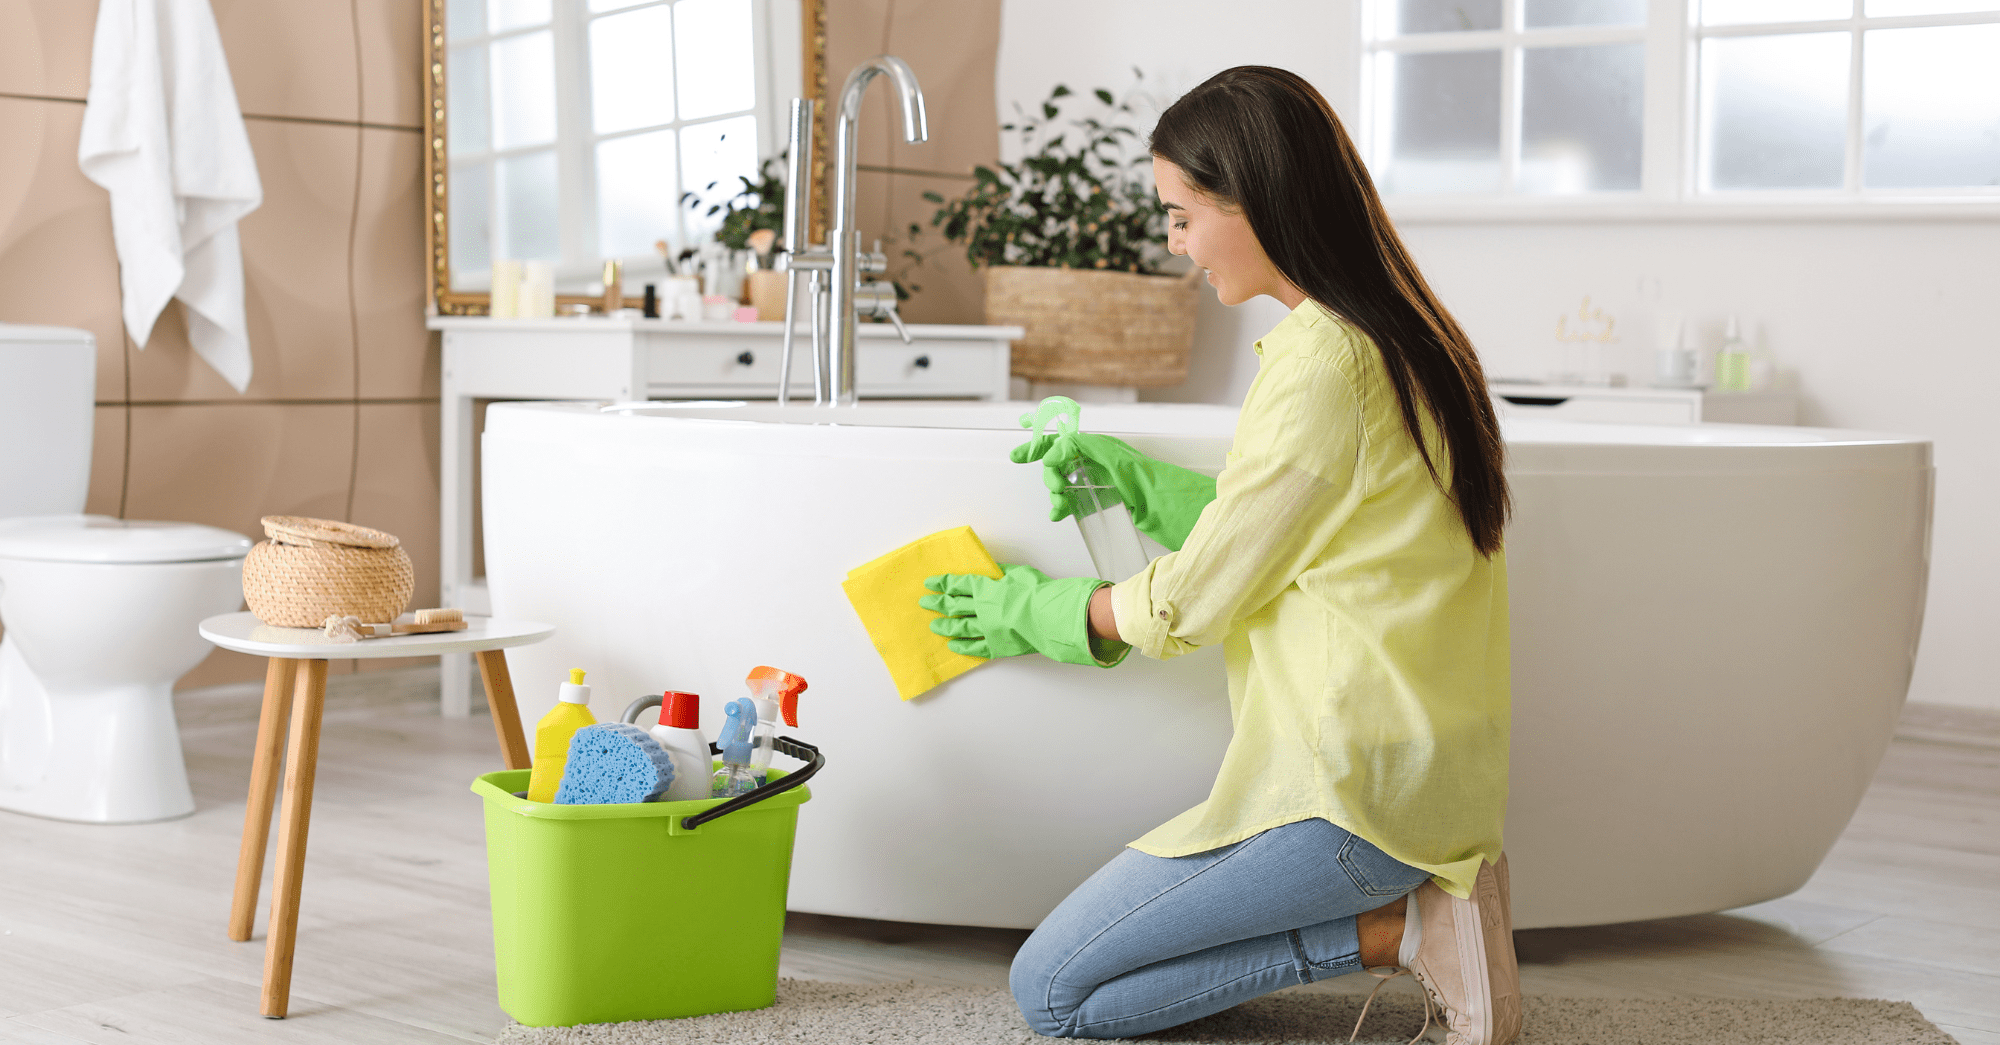 How to Clean your Bathroom for the End of Lease?